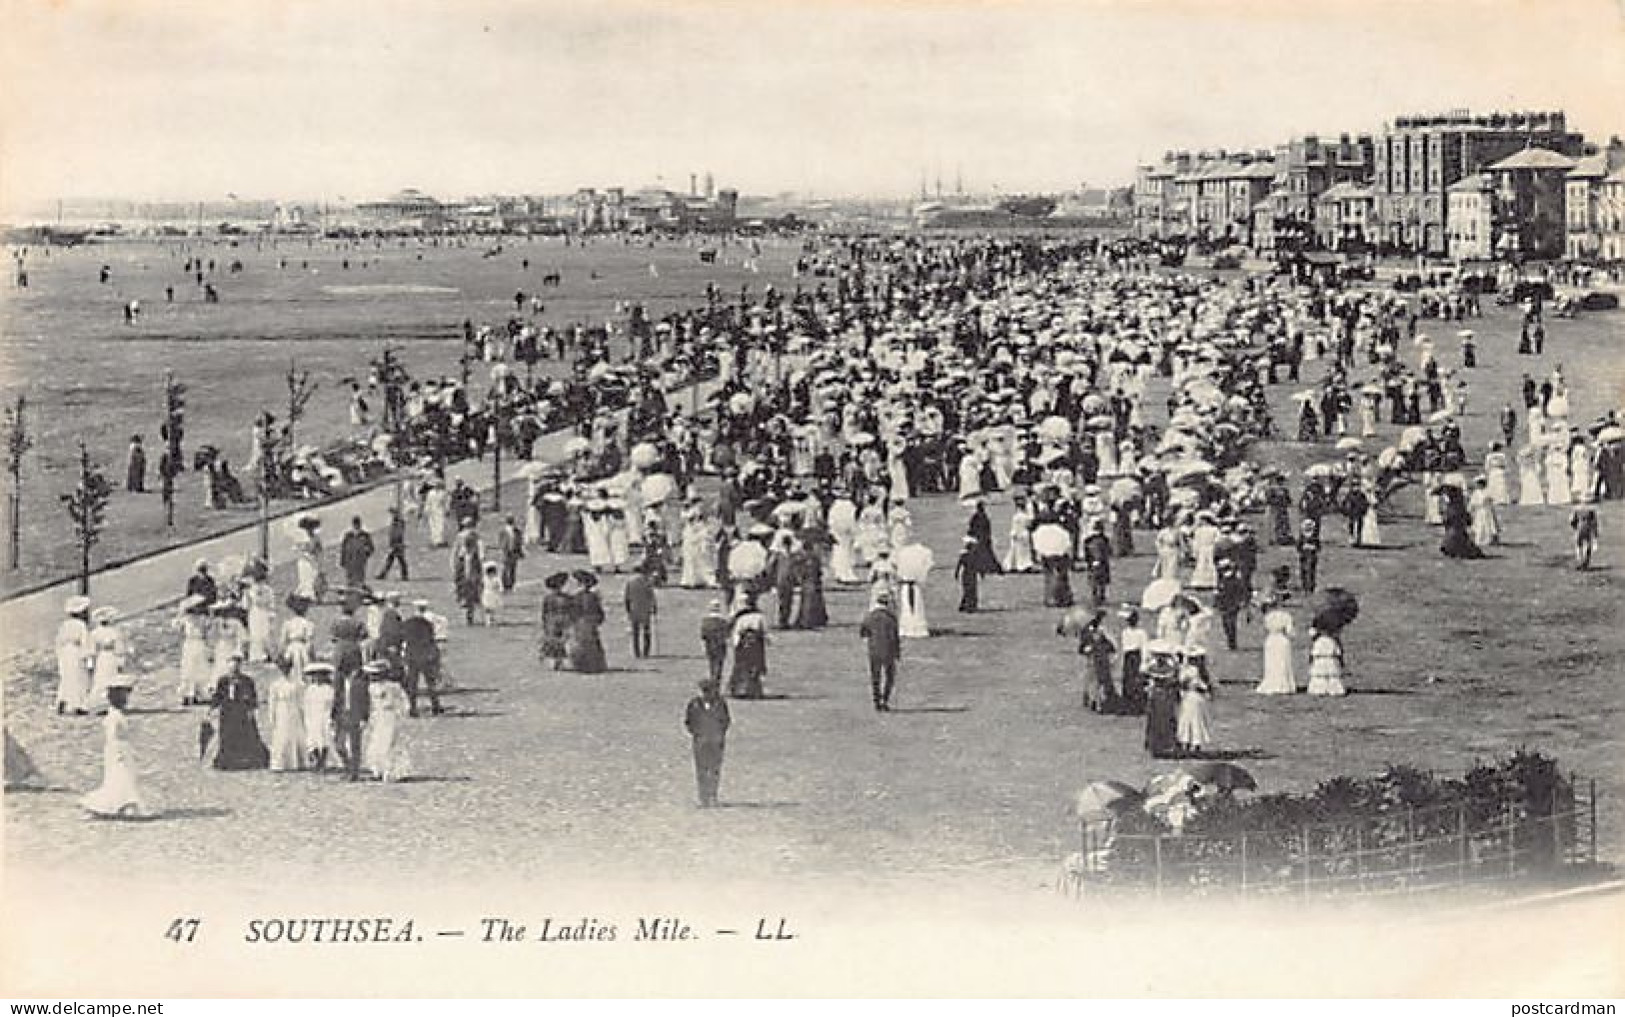 England - Hants - SOUTHSEA - The Ladies Mile - Publisher Levy LL 47 - Portsmouth